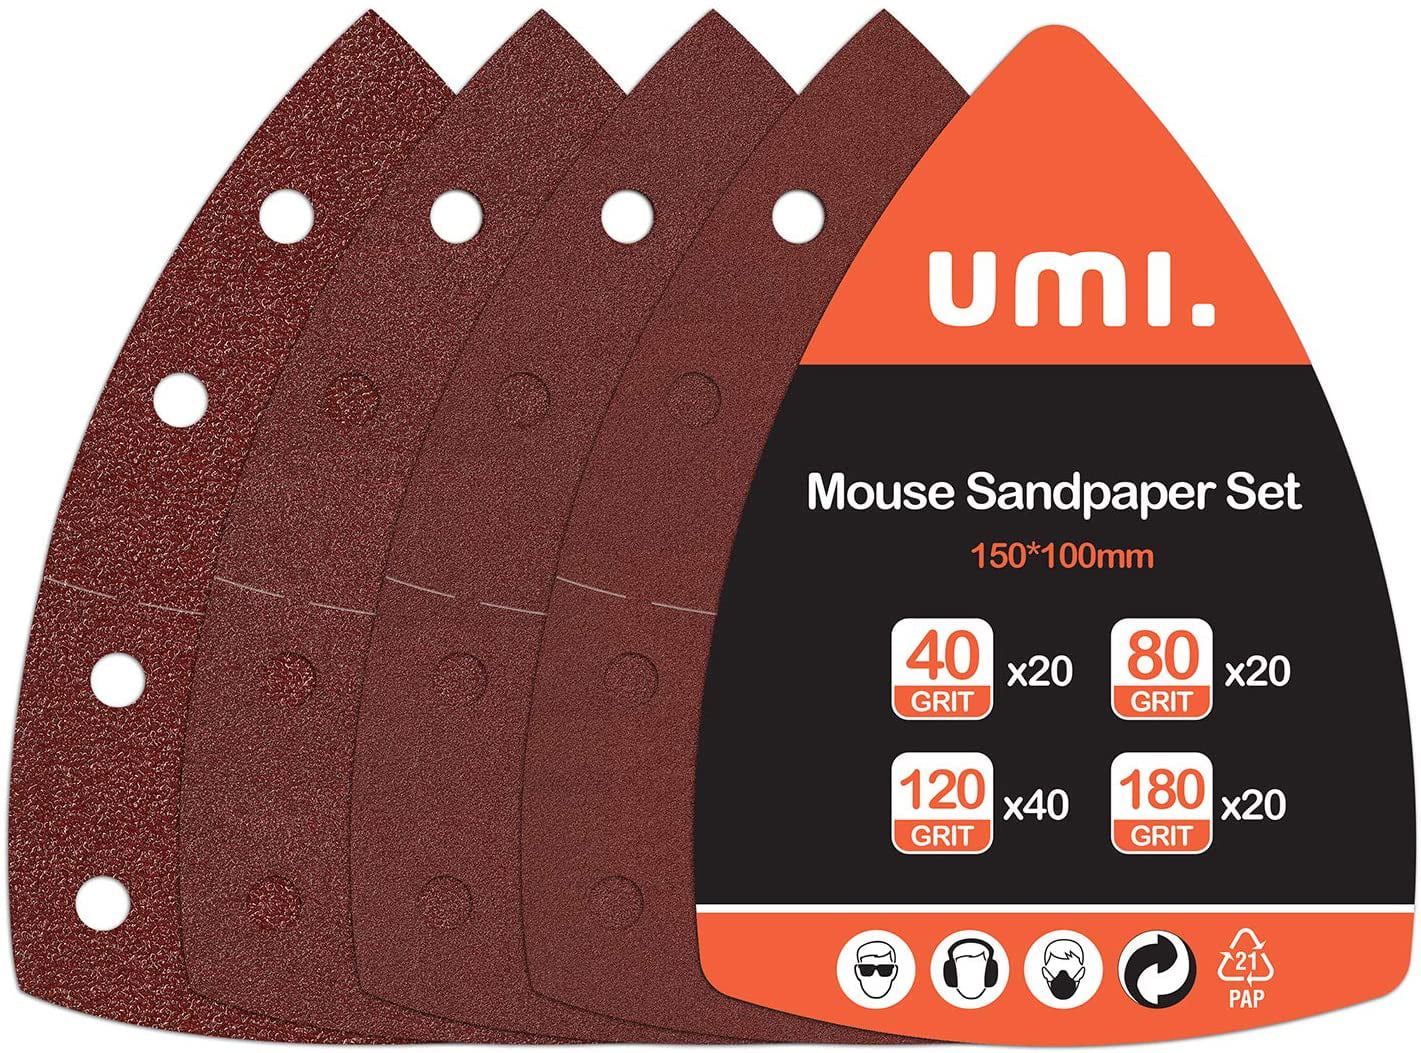 Wood and Small Space Polish Sanding Works Micro Detail Sander Sandpaper Tools for Woodworks 3.5”x 1” Mini Sander Kit with 60PCS Hook and Loop Sanding Strips 60 80 120 180 240 320 Grit for Craft 